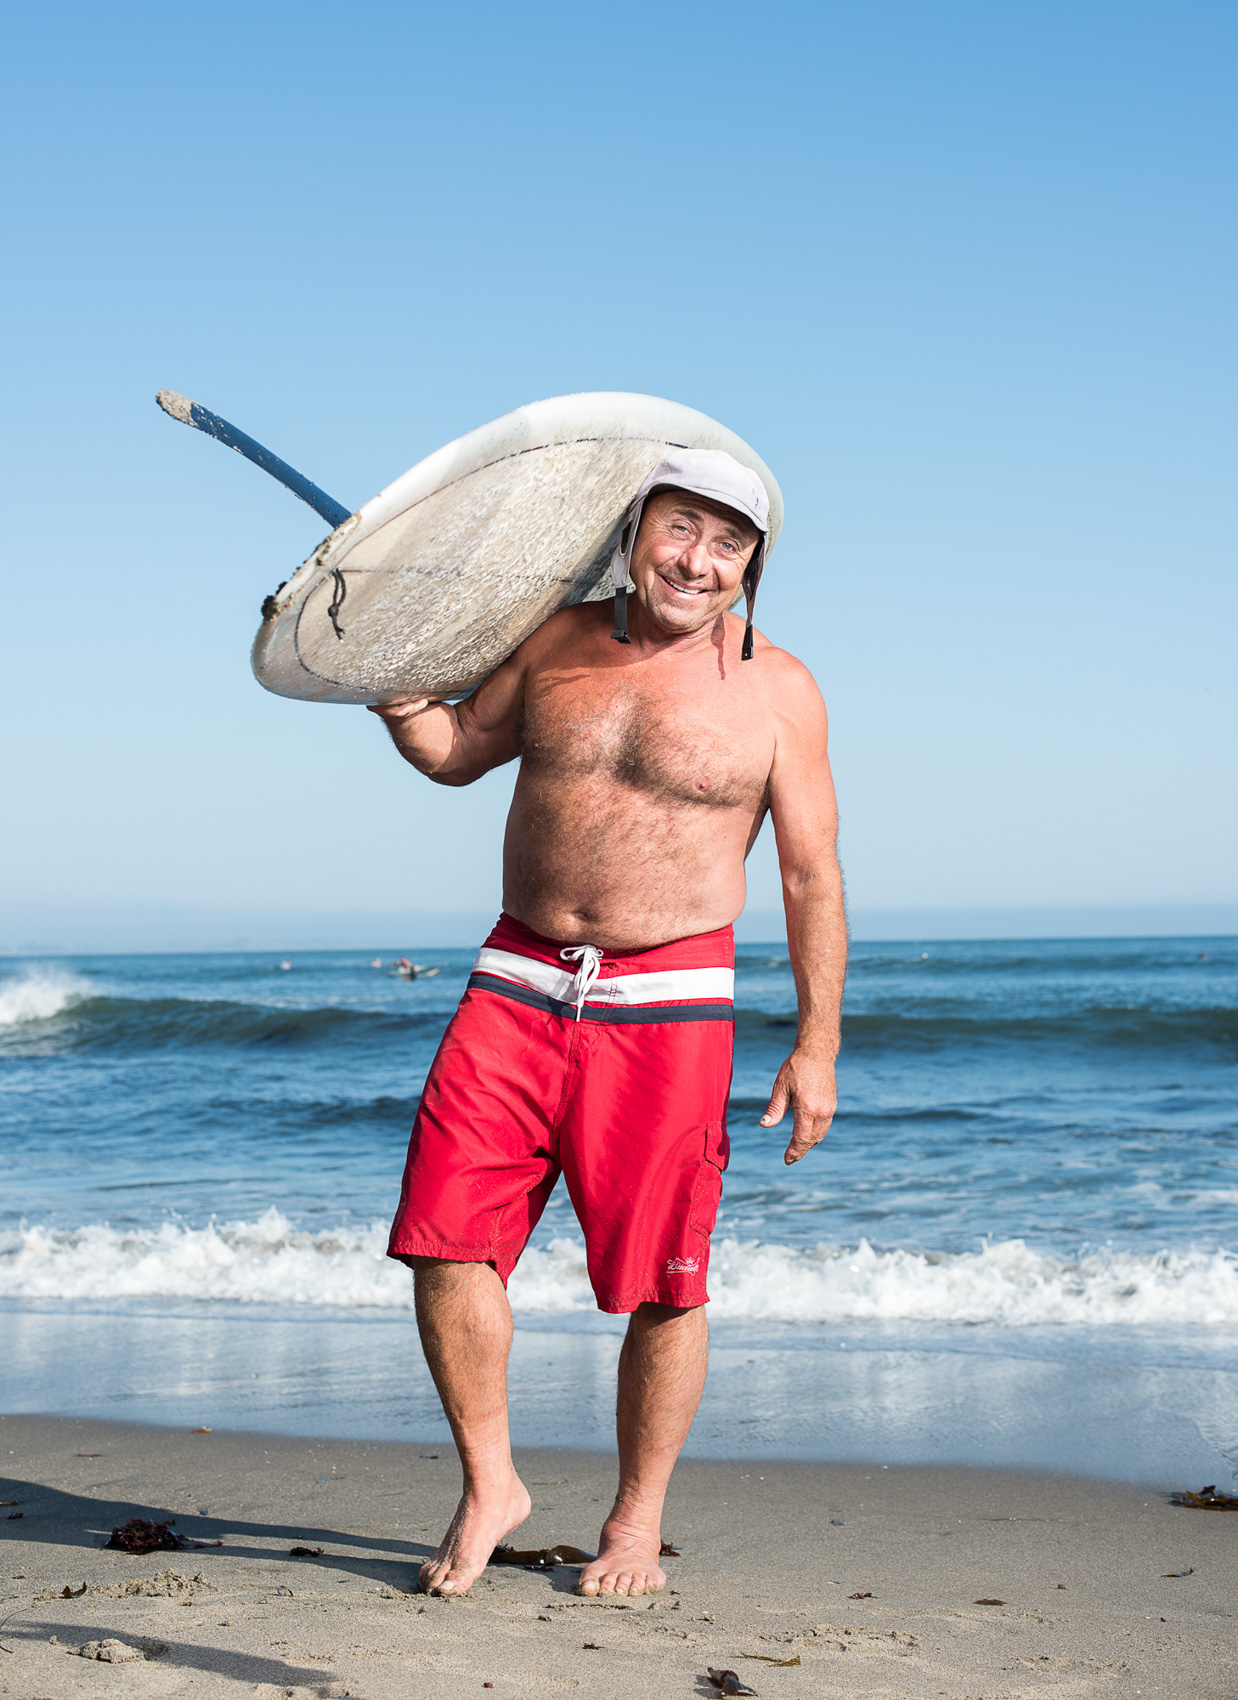 An older man surfer stands with his board on the beach in Santa Cruz, Calif.